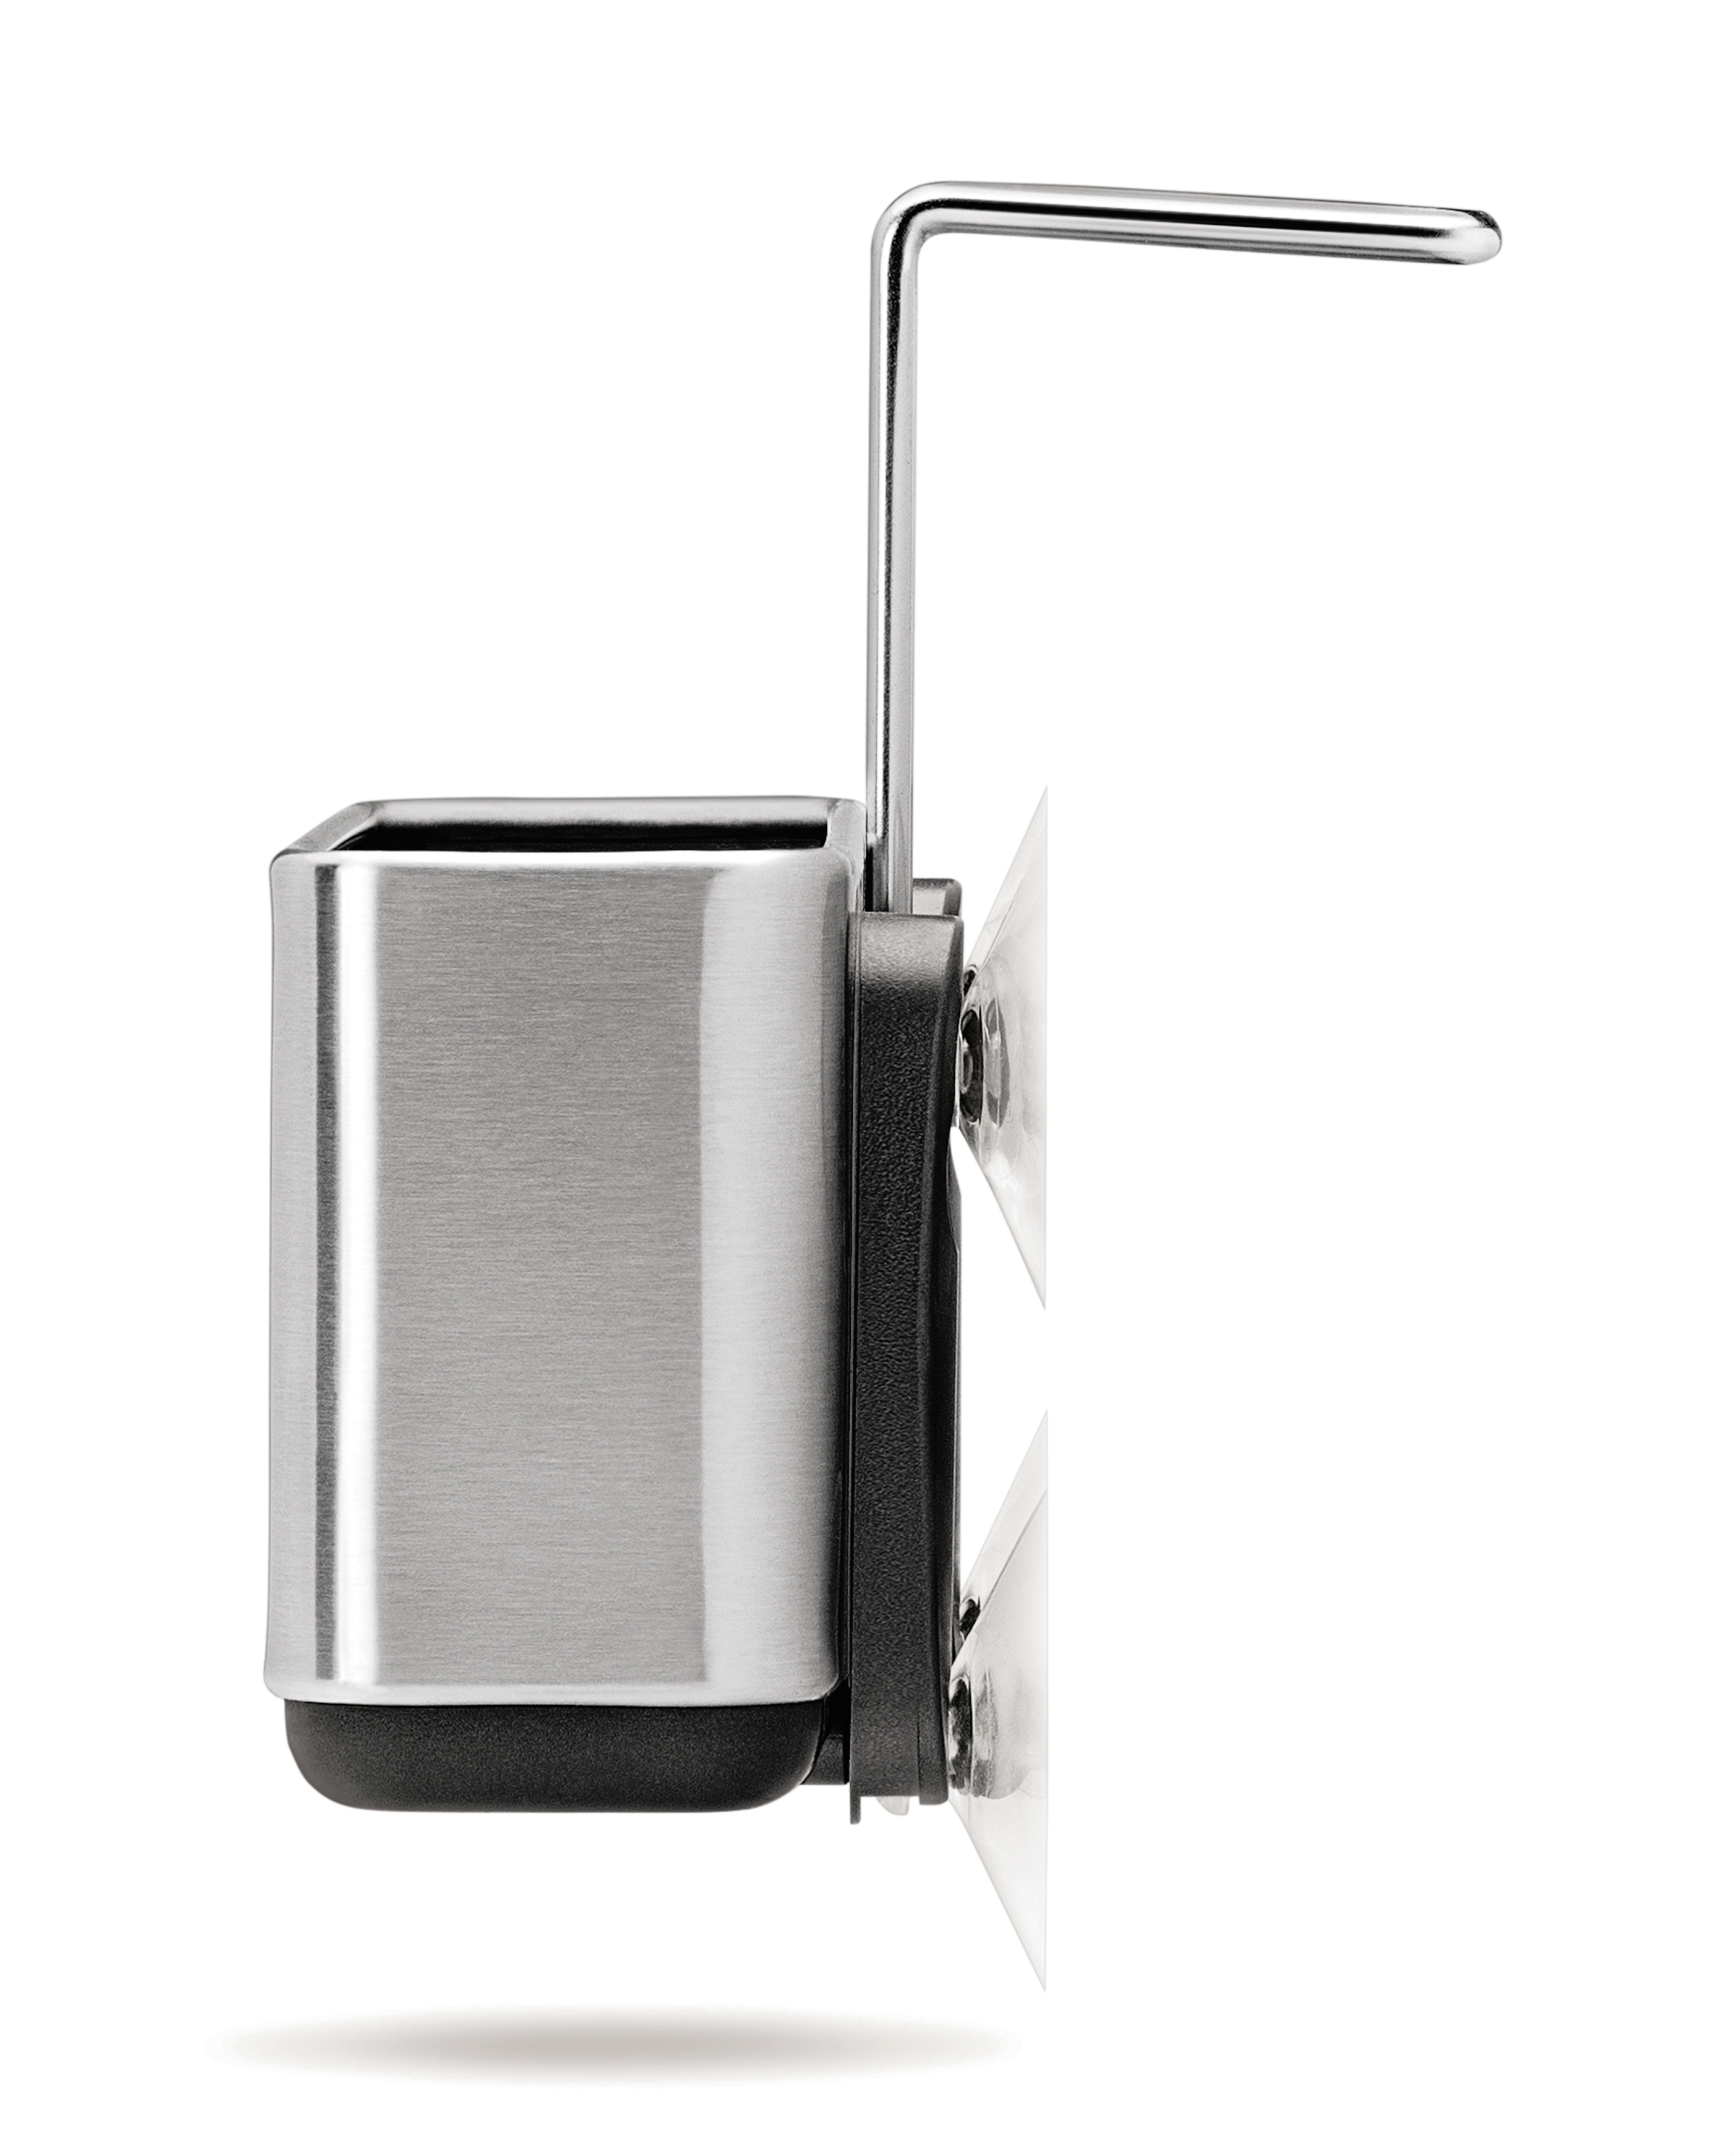 simplehuman Slim Sink Caddy, Brushed Stainless Steel - image 2 of 4